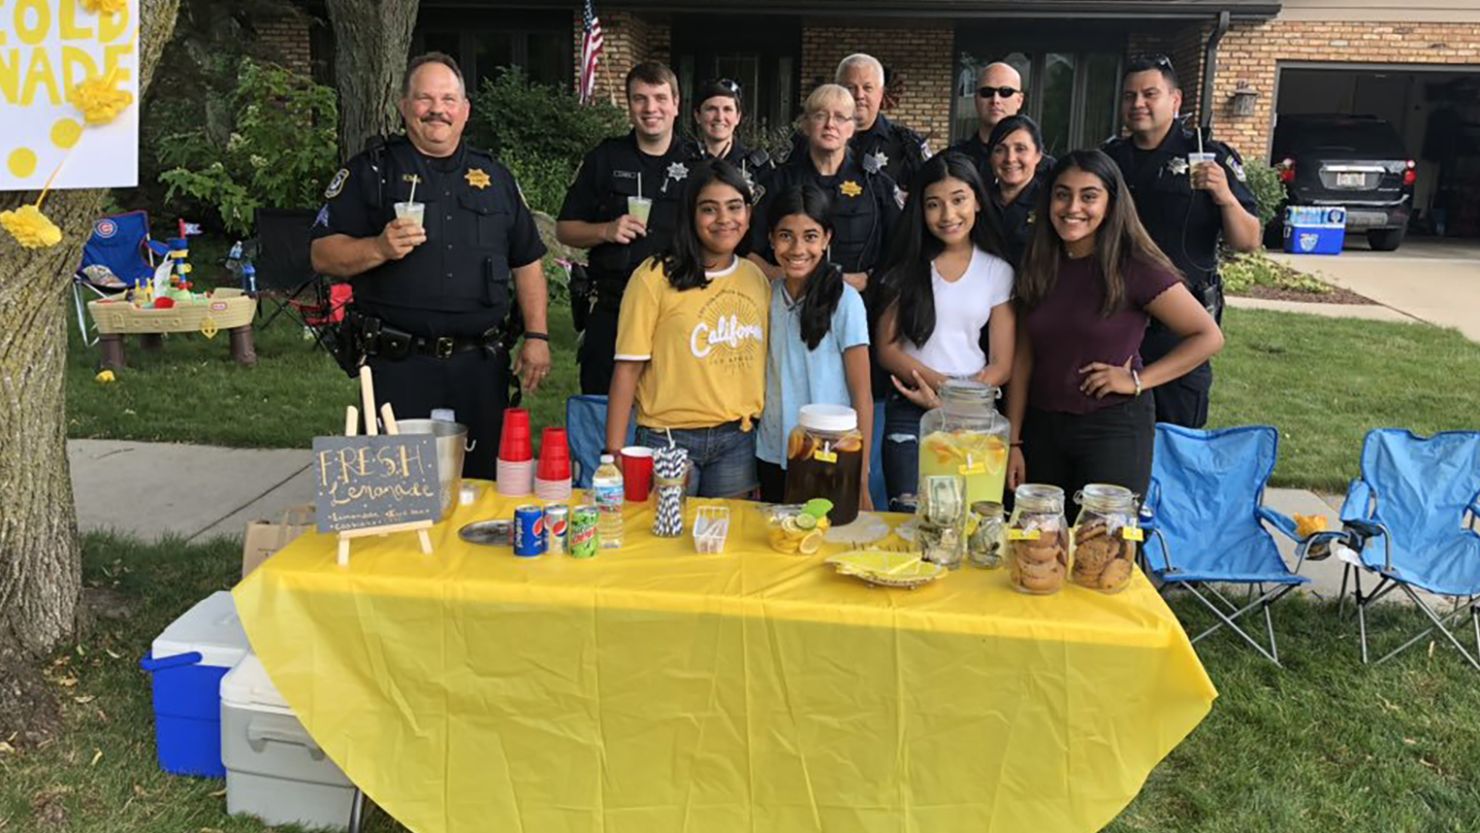 Alizay Kashif, in yellow, and her friends saw an outpouring of support for their lemonade stand.